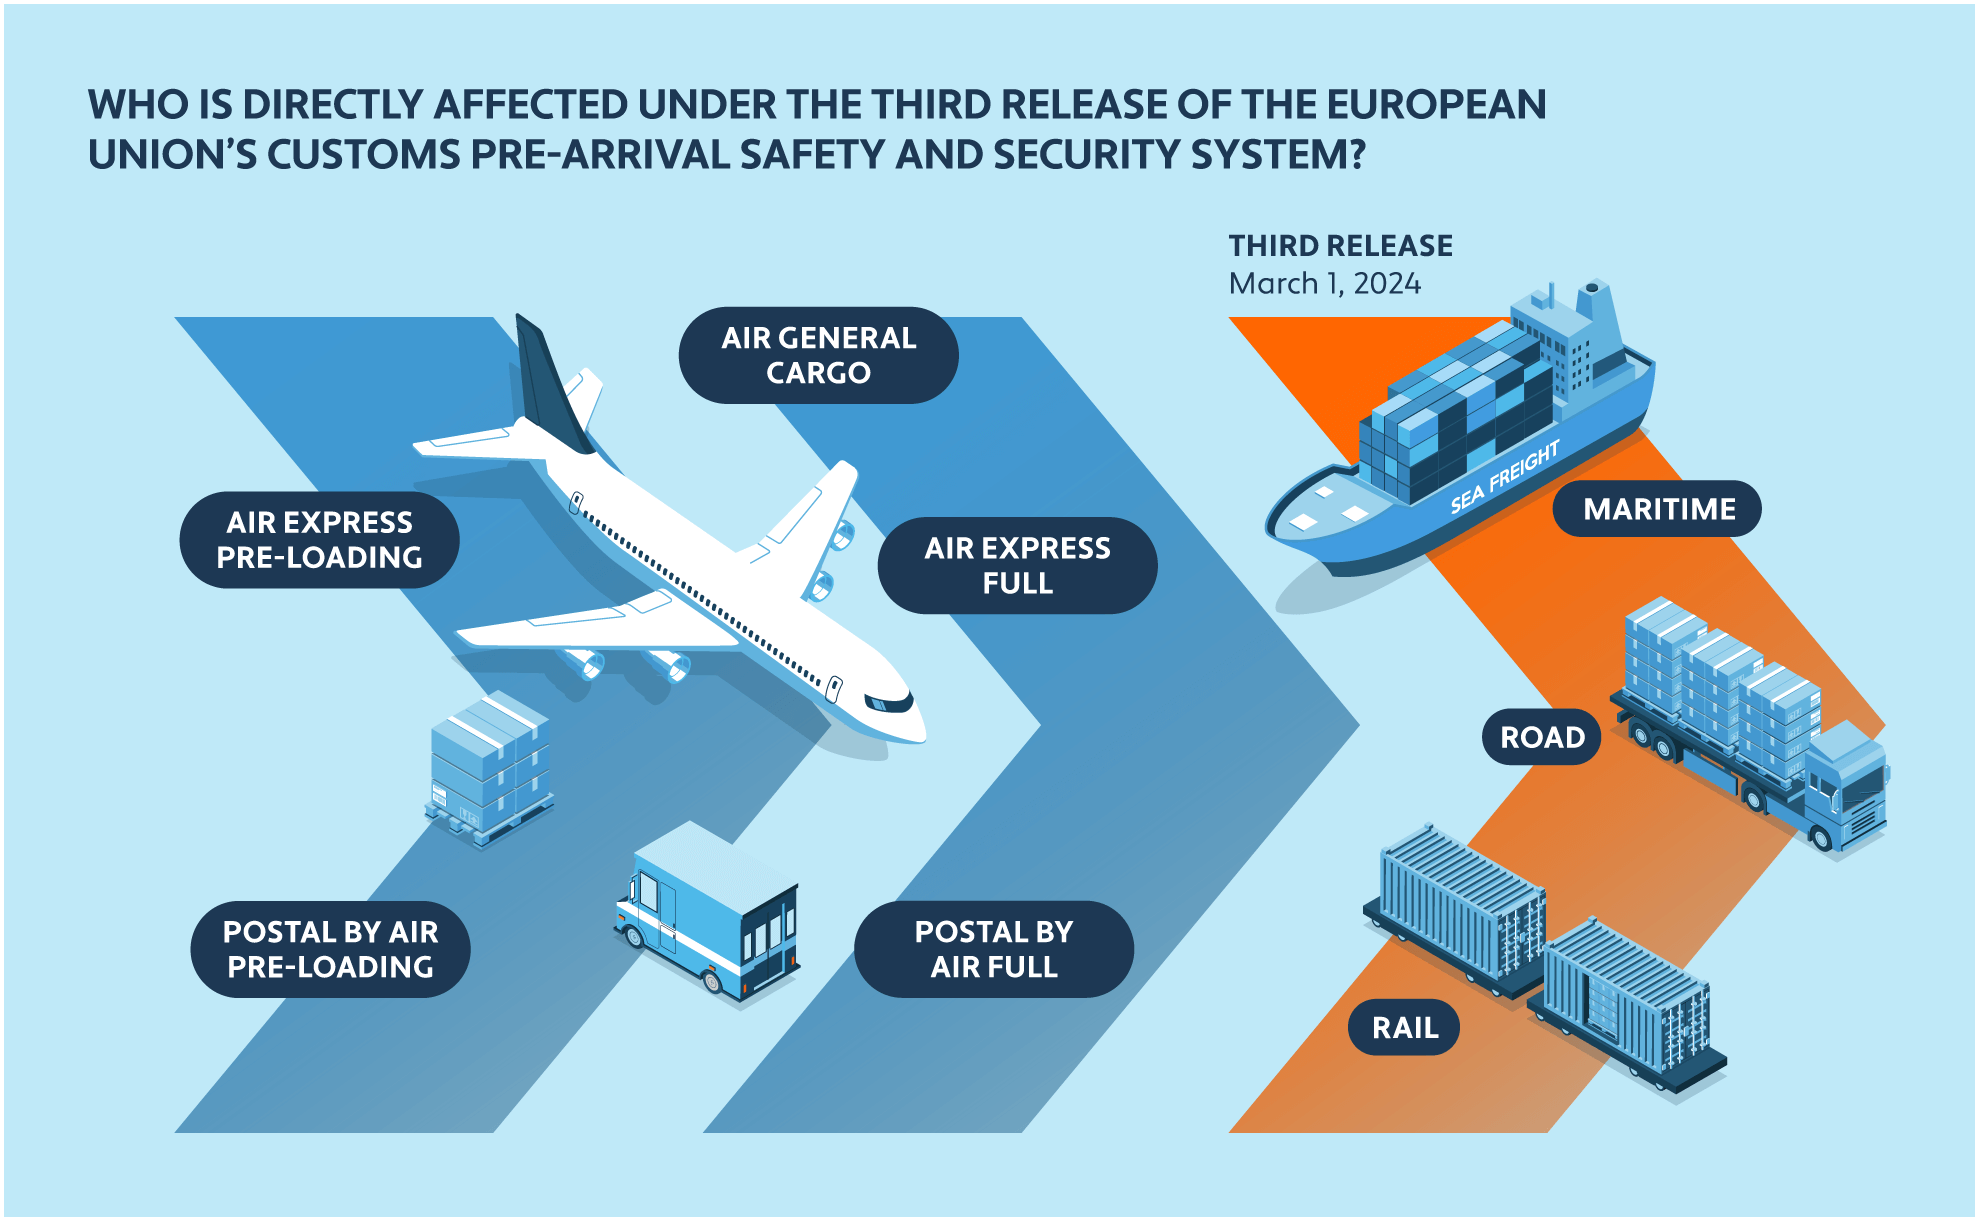 Illustrated graphic of modes of transport affected by new EU customs rules.